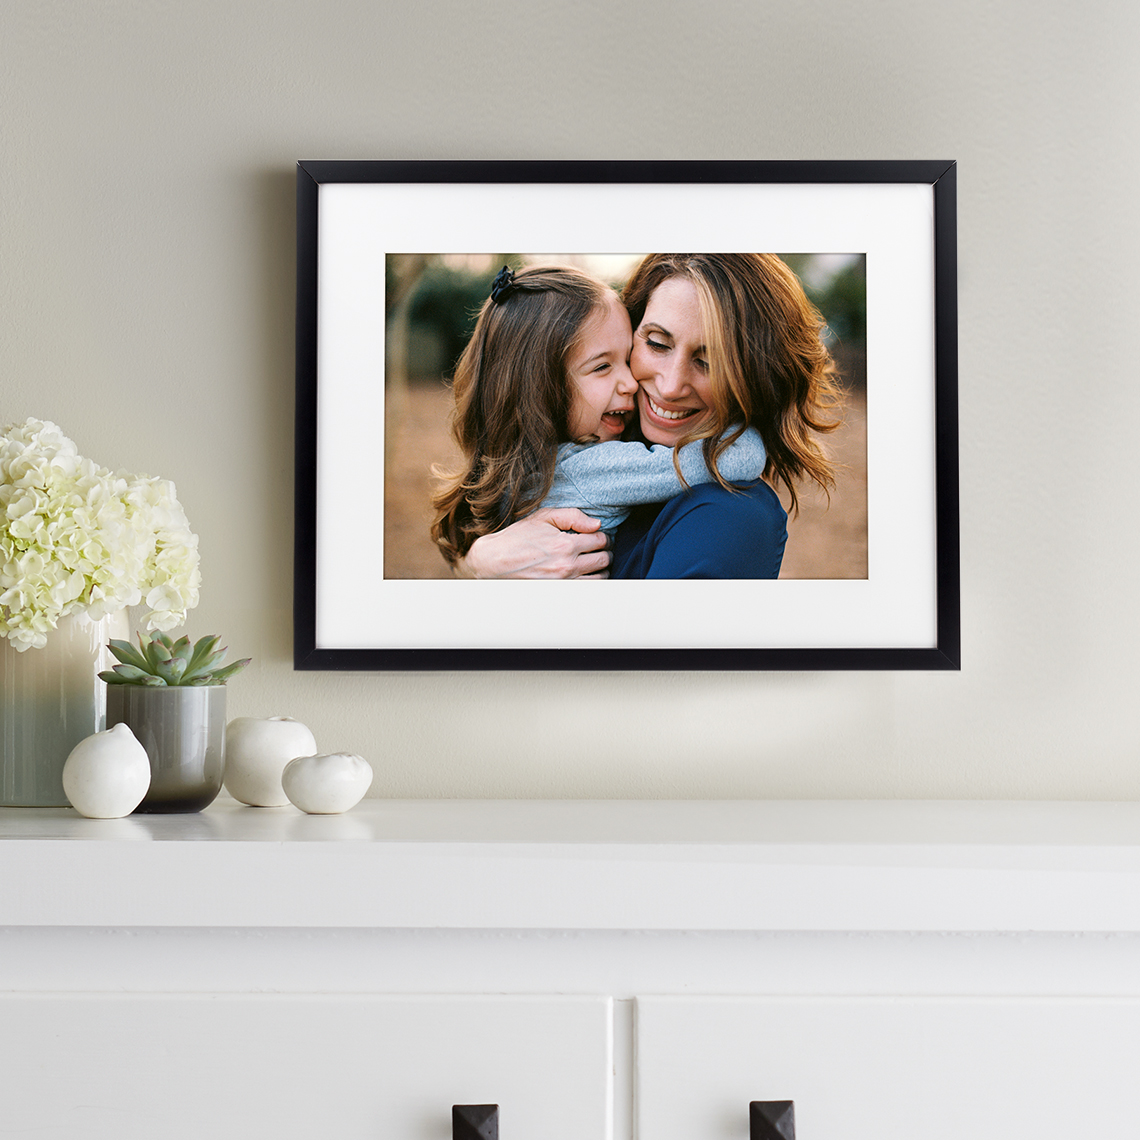 Framed Canvas Printing Services in Los Angeles